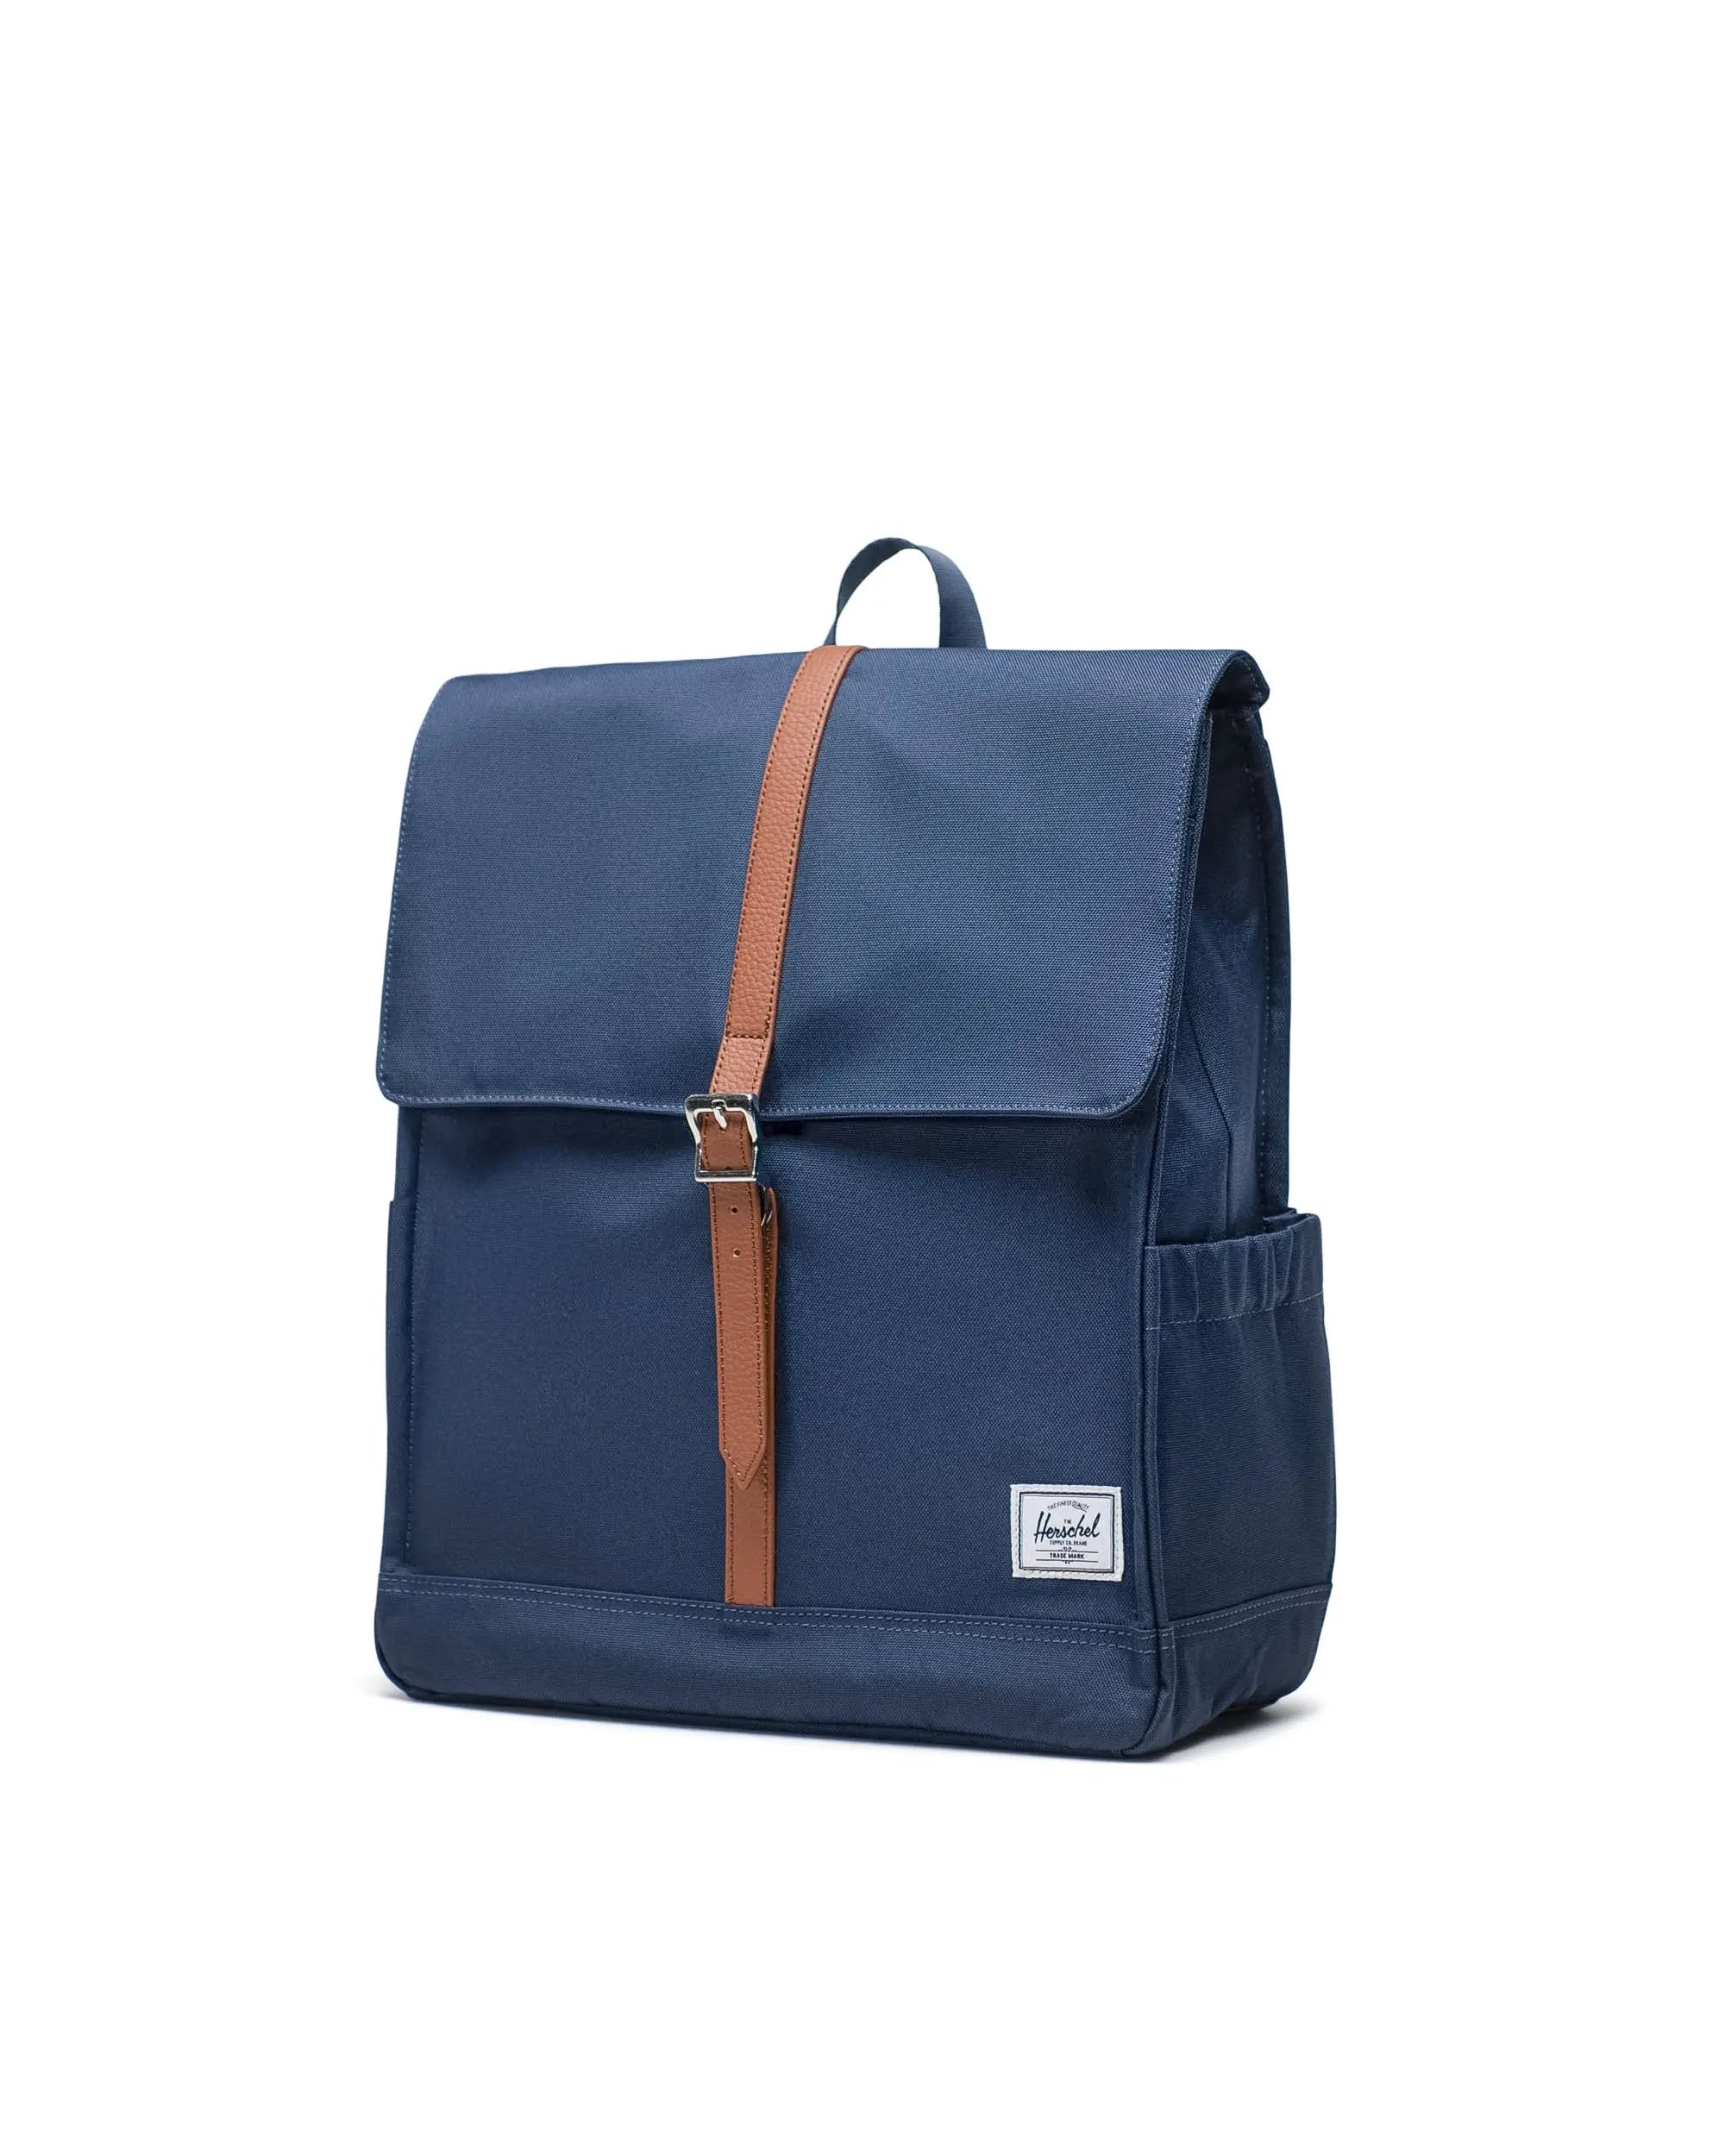 City Backpack - NAVY-00007